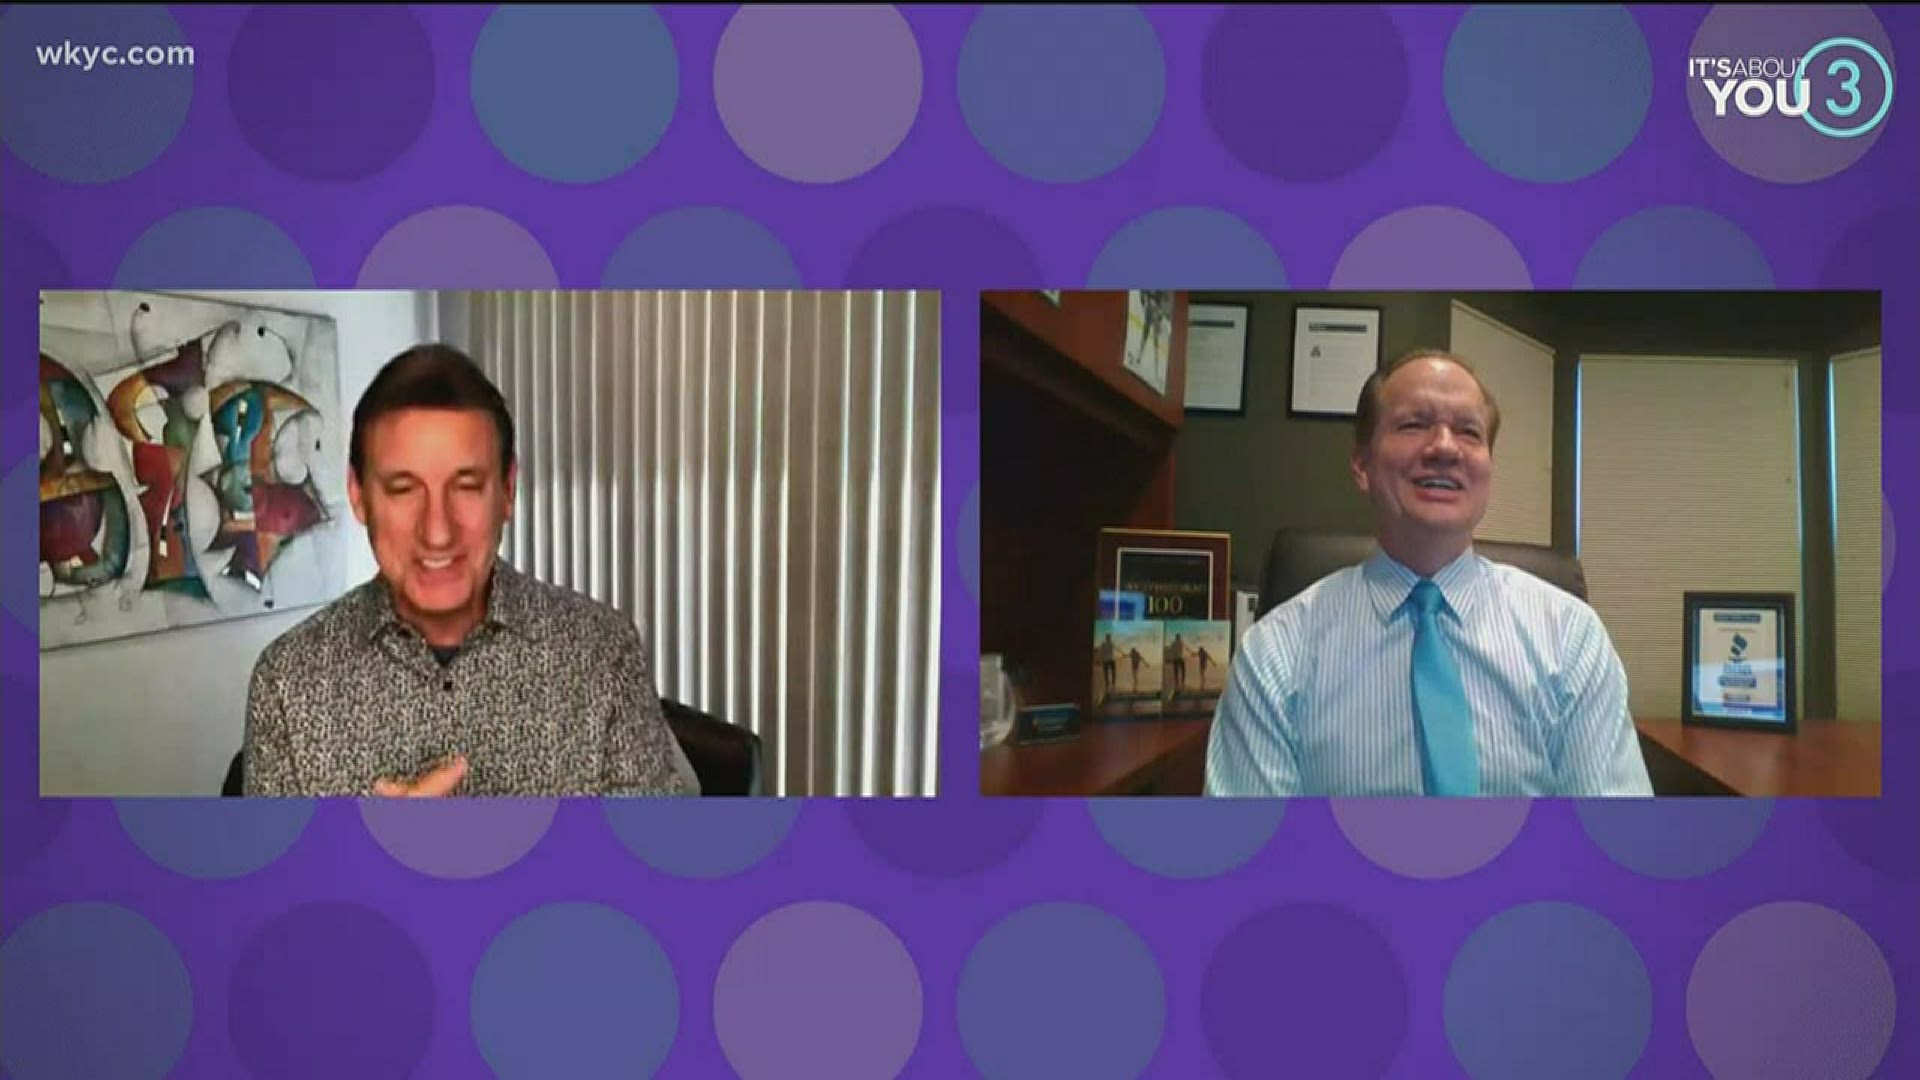 Our friend Dave Mortach, from Mortach Financial, talks with Joe about making sure you have a reliable income when you retire!